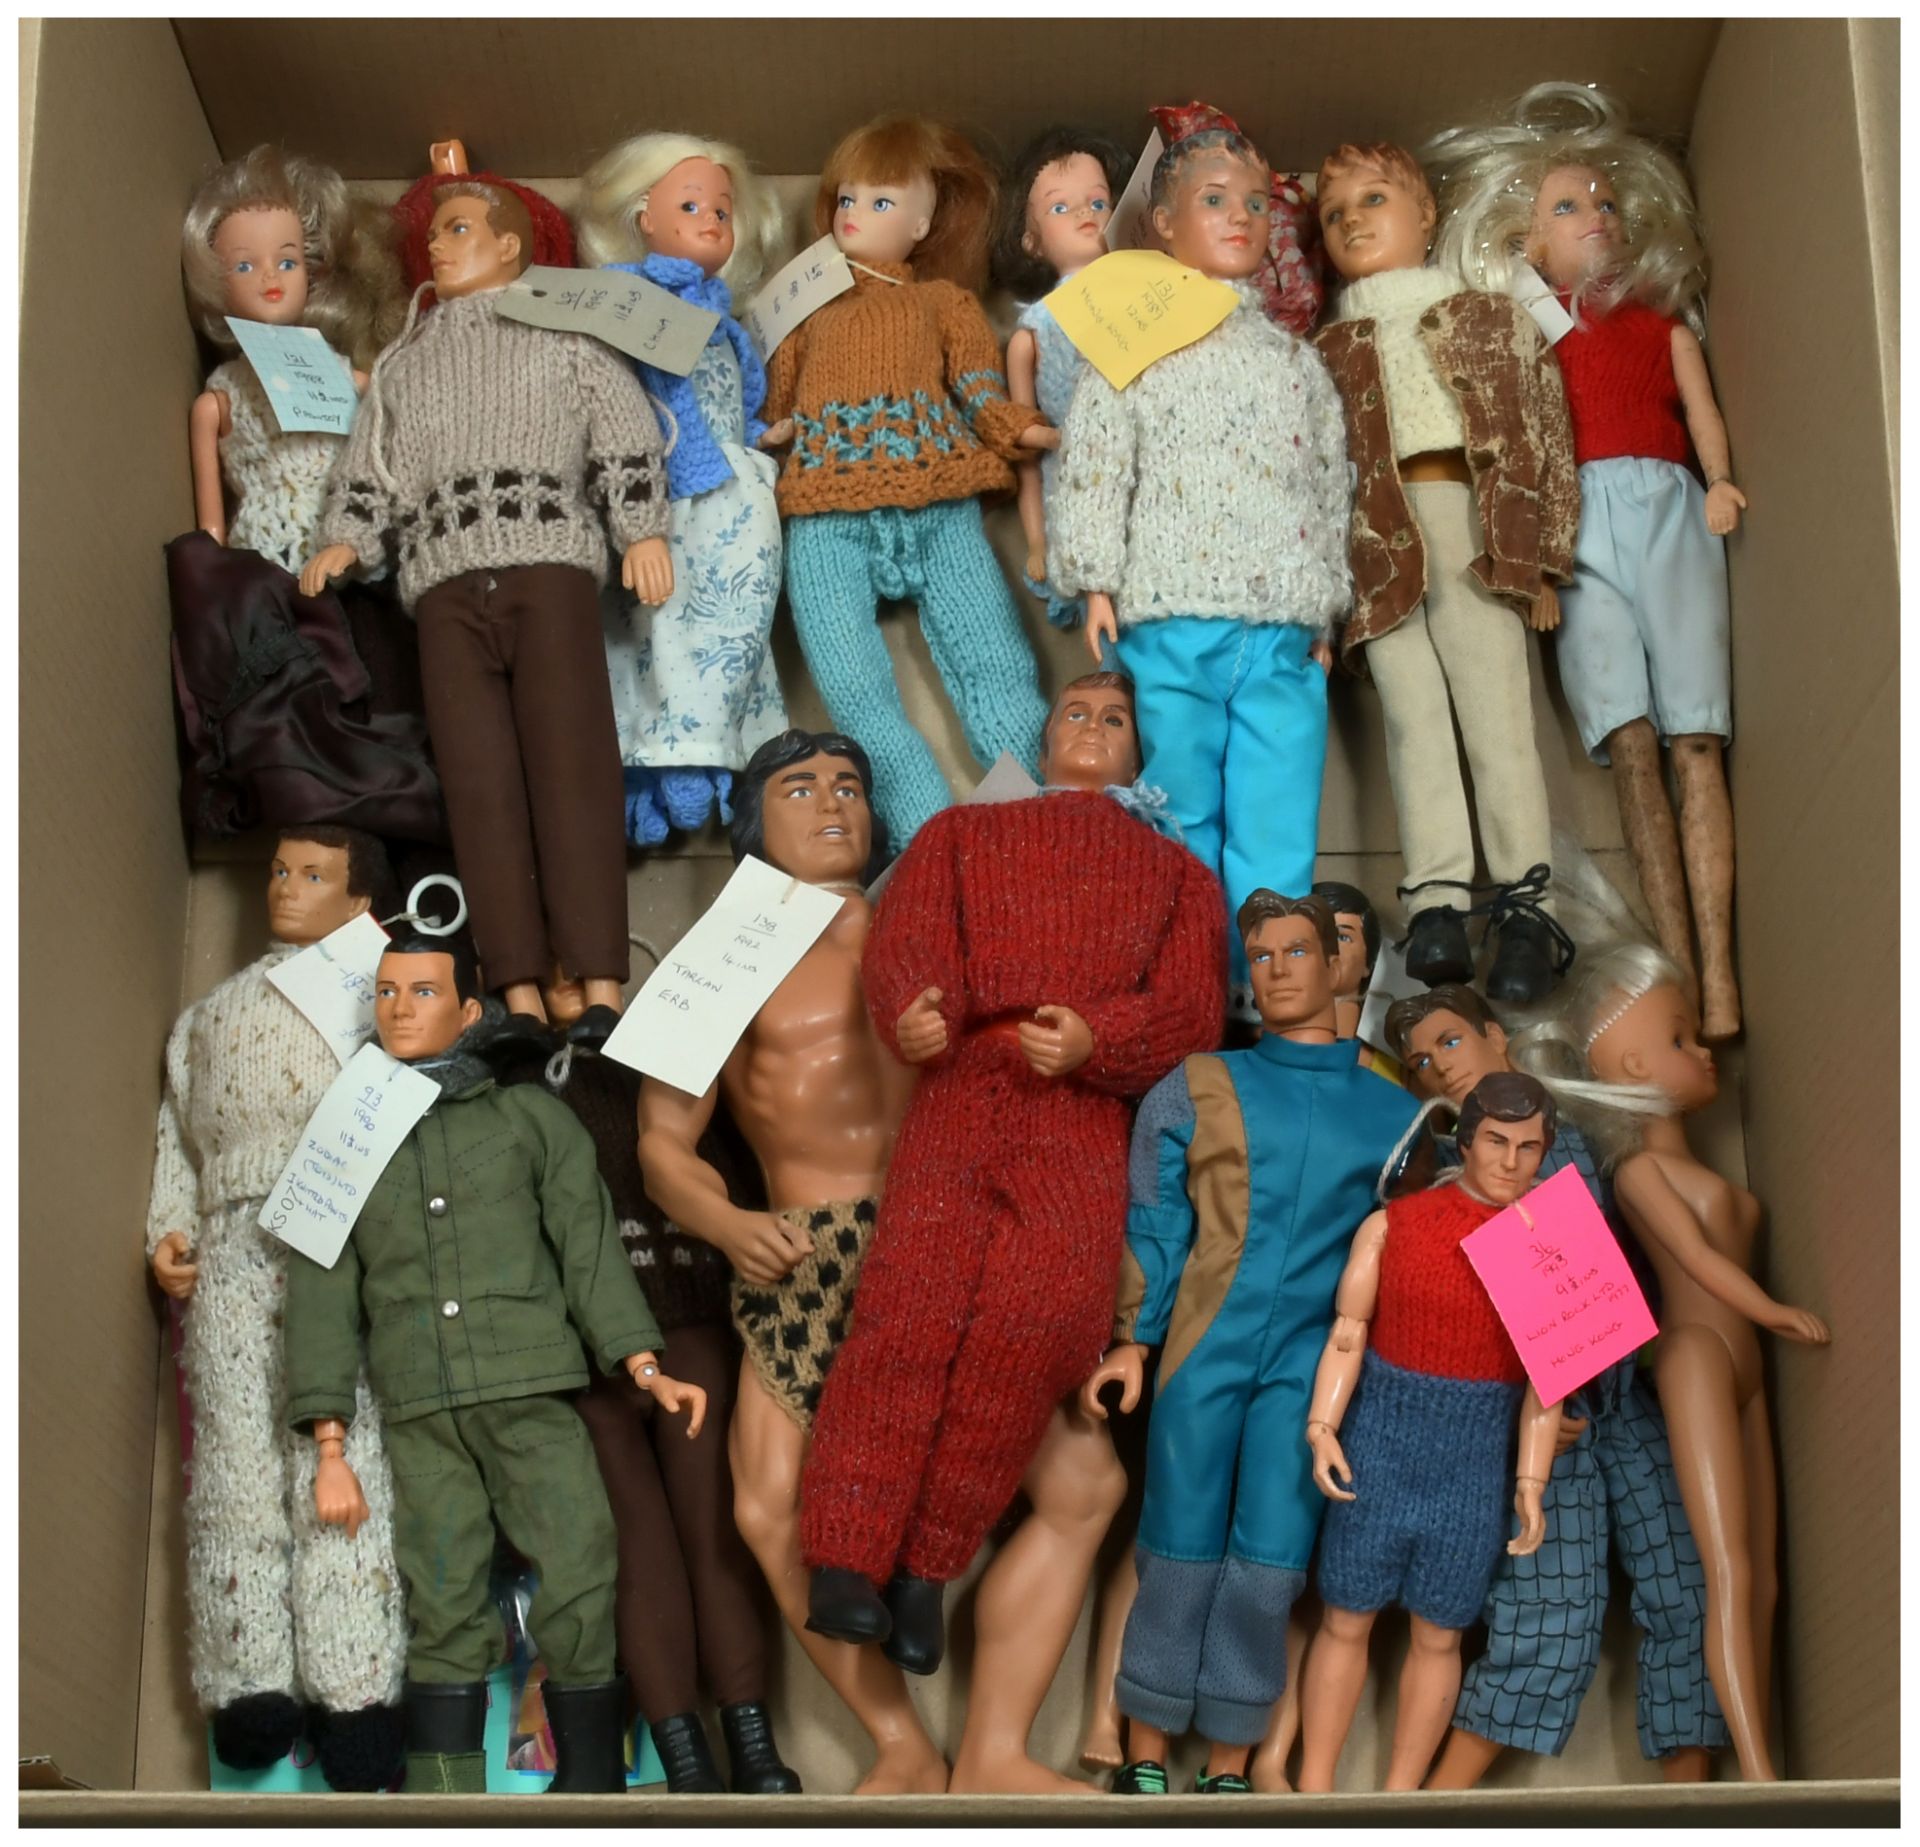 Collection of vintage dolls including Pedigree Sindy Paul dolls and Zodiac Toys